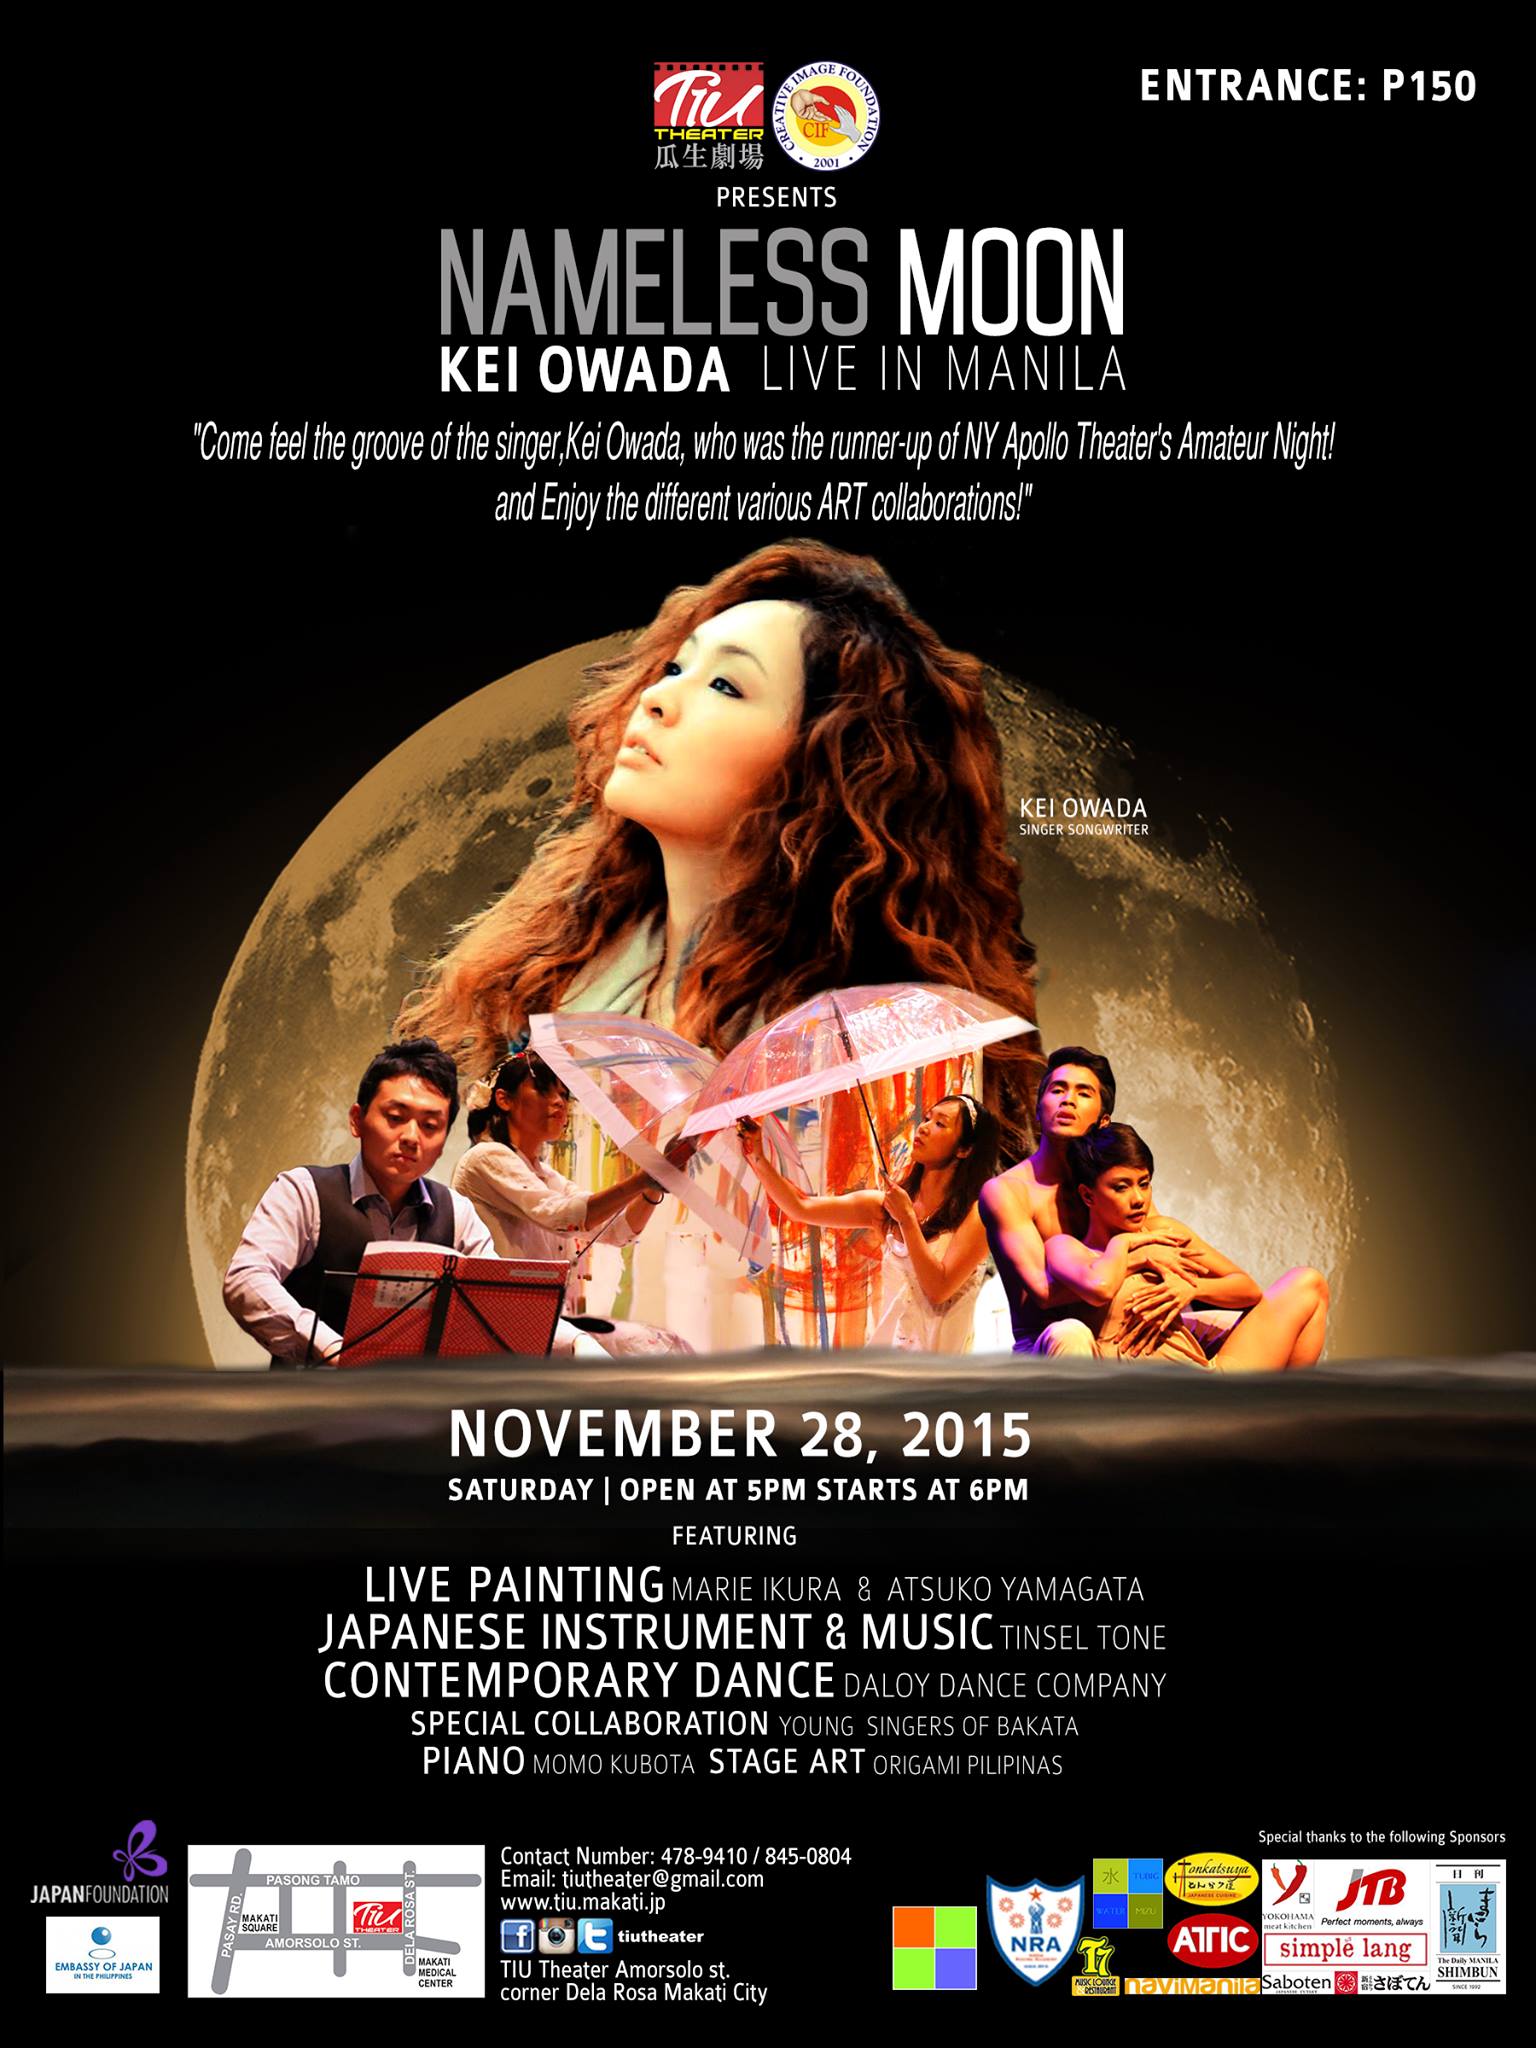 Nameless Moon -Kei Owada Live in Manila- clock Saturday, November 28 at 5:00pm - 8:00pm Next Week pin Show Map TIU Theater Amorsolo corner Dela Rosa Sts., 1230 Makati, Philippines envelope Invited by Atsuko Yamagata ■DETAILS Kei Owada is Japanese singer-song-writer. Amateur Night of Apollo Theater in NY which has produced a many of famous artists by that contest, like the James Brown, Jackson 5, and Stevie Wonder etc. also. Kei Owada had experience that runner-up in same stage of 2014. This time will be first performance by Kei Owada in the Philippines. And also, with Contemporary dance group was popular before our concert, named Daloy Dance Company. And to collaborate with live painting by Marie Ikura and Atsuko Yamagata. Co-star on the other will be a Japanese musical instrument group, “Tinsel Tone” by Koto, flute and piano. They play such songs were arranged in jazz for the traditional Japanese music. ■DATE November 28, 2015 Open 17:00 Start 18:00 ■ENTRANCE FEE P150 per person ■ARTIST PROFILE ・SINGER -Kei Owada A Singer song writer based in Tokyo.born and raised in Tokyo, She is an acclaimed singer-songwriter and multi-instrumentalist. In 2014, she survived the auditions of "Amateur Night at the Apollo" in Apollo Theater, New York ,which has threw up James Brown, Jakson 5, Stevie Wonder, Lauryn Hill and more. And she finally won the second place there.Her influences are Carole King, Aretha Franklin, Joni Mitchell, Tete, Aimee Mann, Eva Cassidy, Yoko Kanno, Motown, Gospell Music and more.Now she is playing at venues which is famous as R&B music and Jazz all over Japan, and overseas as well, like New York. Kei was recognized very quickly in the New York scene, because her songs were influenced by many acclaimed American songwriters. "I don't understand what she's singing about. But, it's not about that anymore. She's so wonderful. "…. Owner of Bitter End Kenny. FERTURING ・LIVE PAINTING -Marie